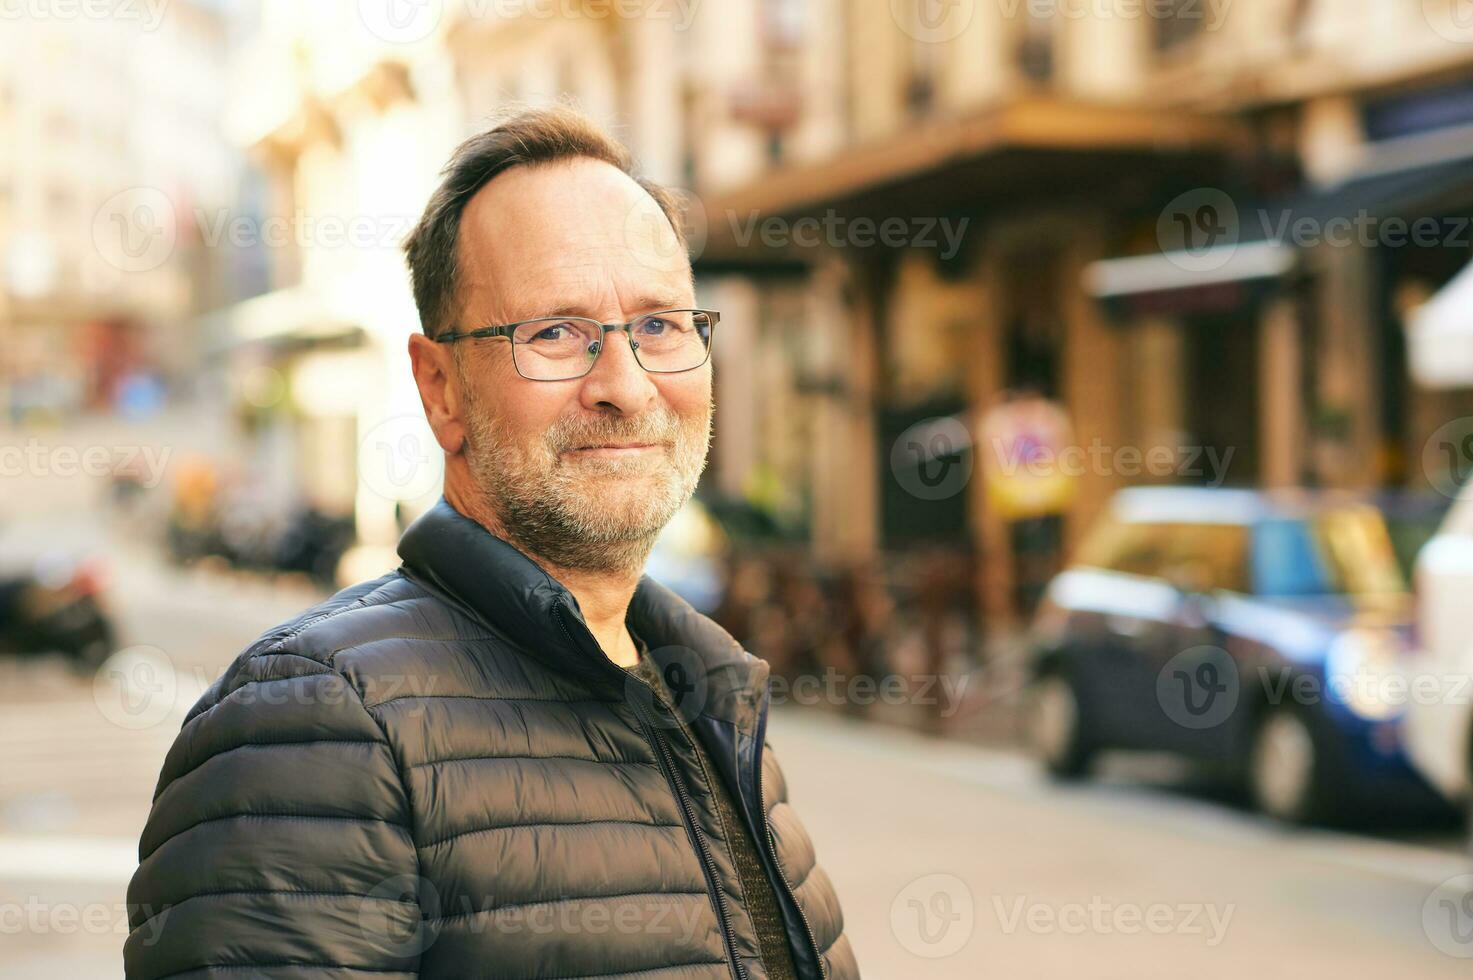 Outdoor portrait of middle age man in city, wearing blue jacket and eyeglasses photo